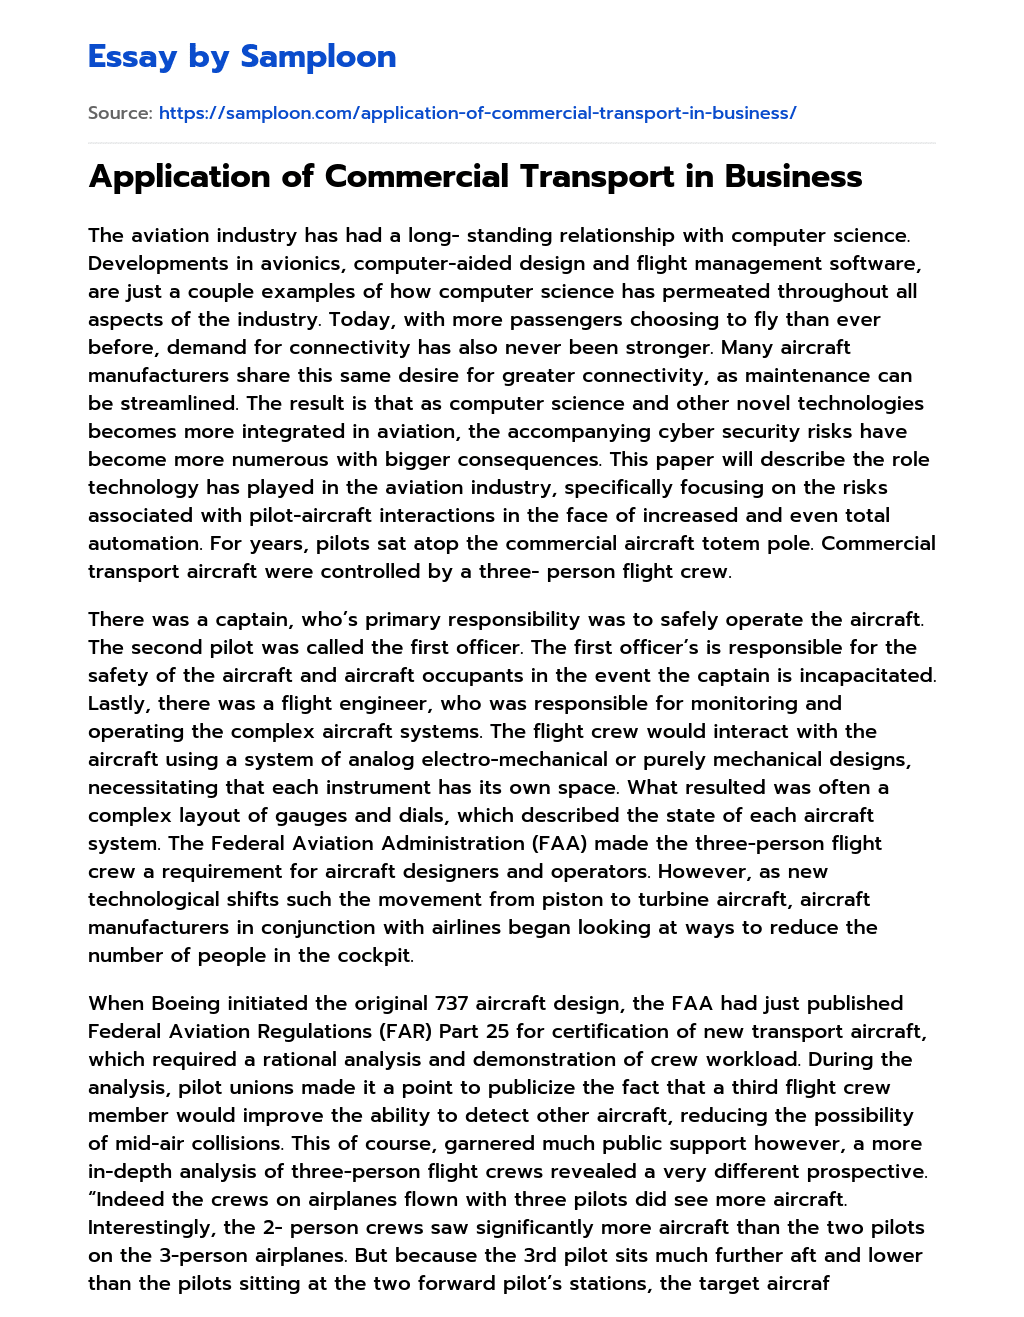 Application of Commercial Transport in Business essay